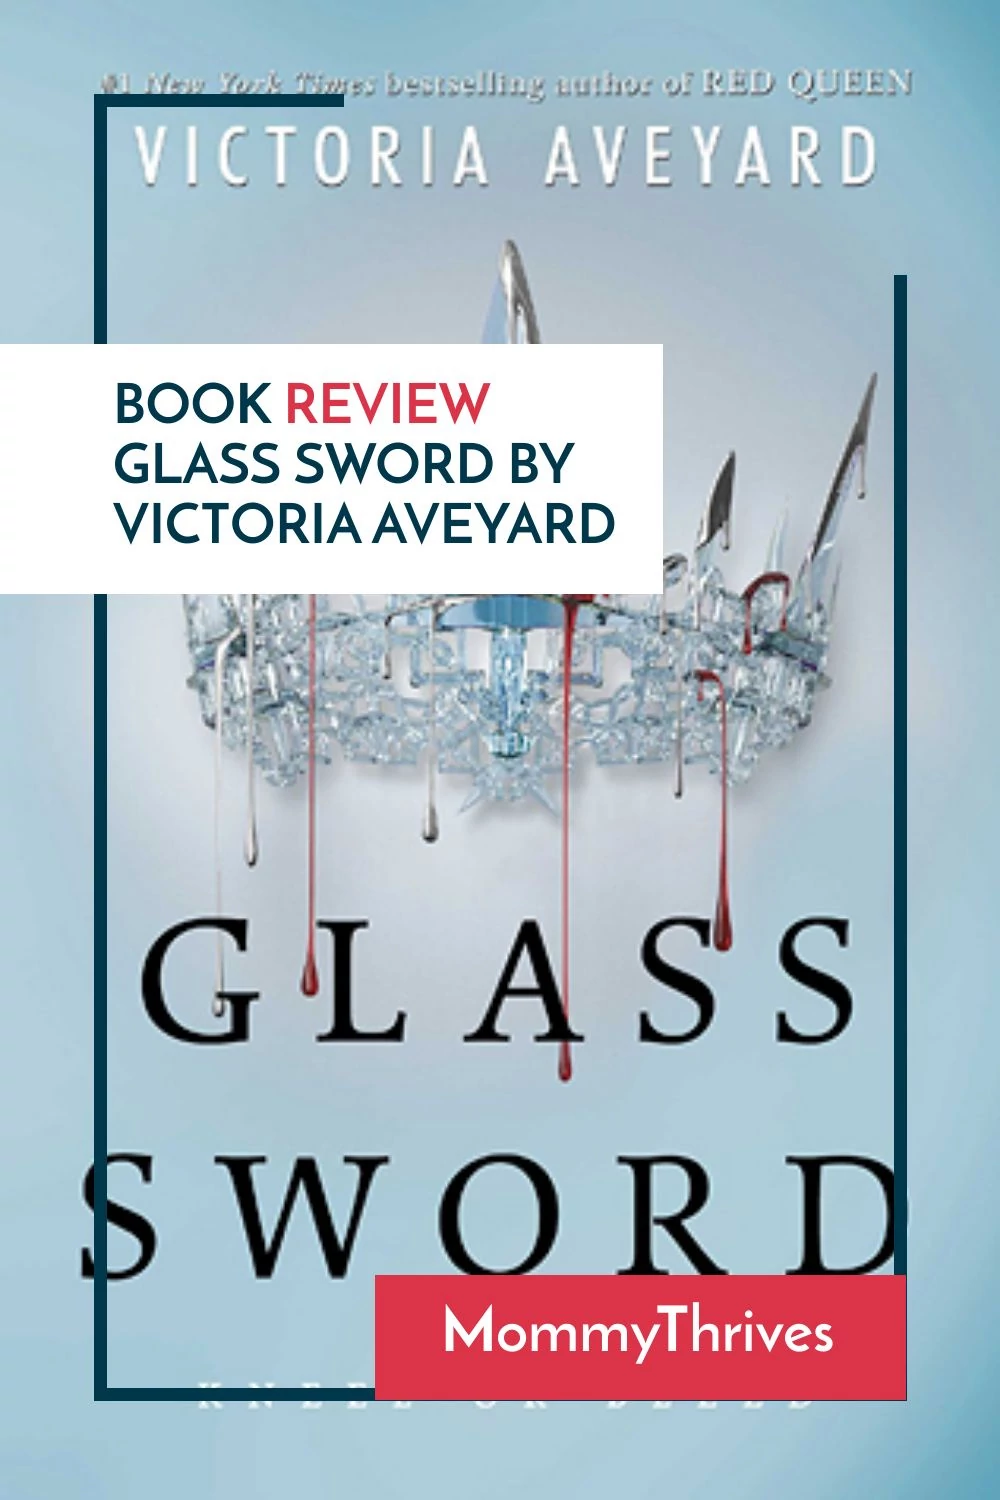 Red Queen Series Book Reviews - Book Review Glass Sword by Victoria Aveyard - Glass Sword Book Review